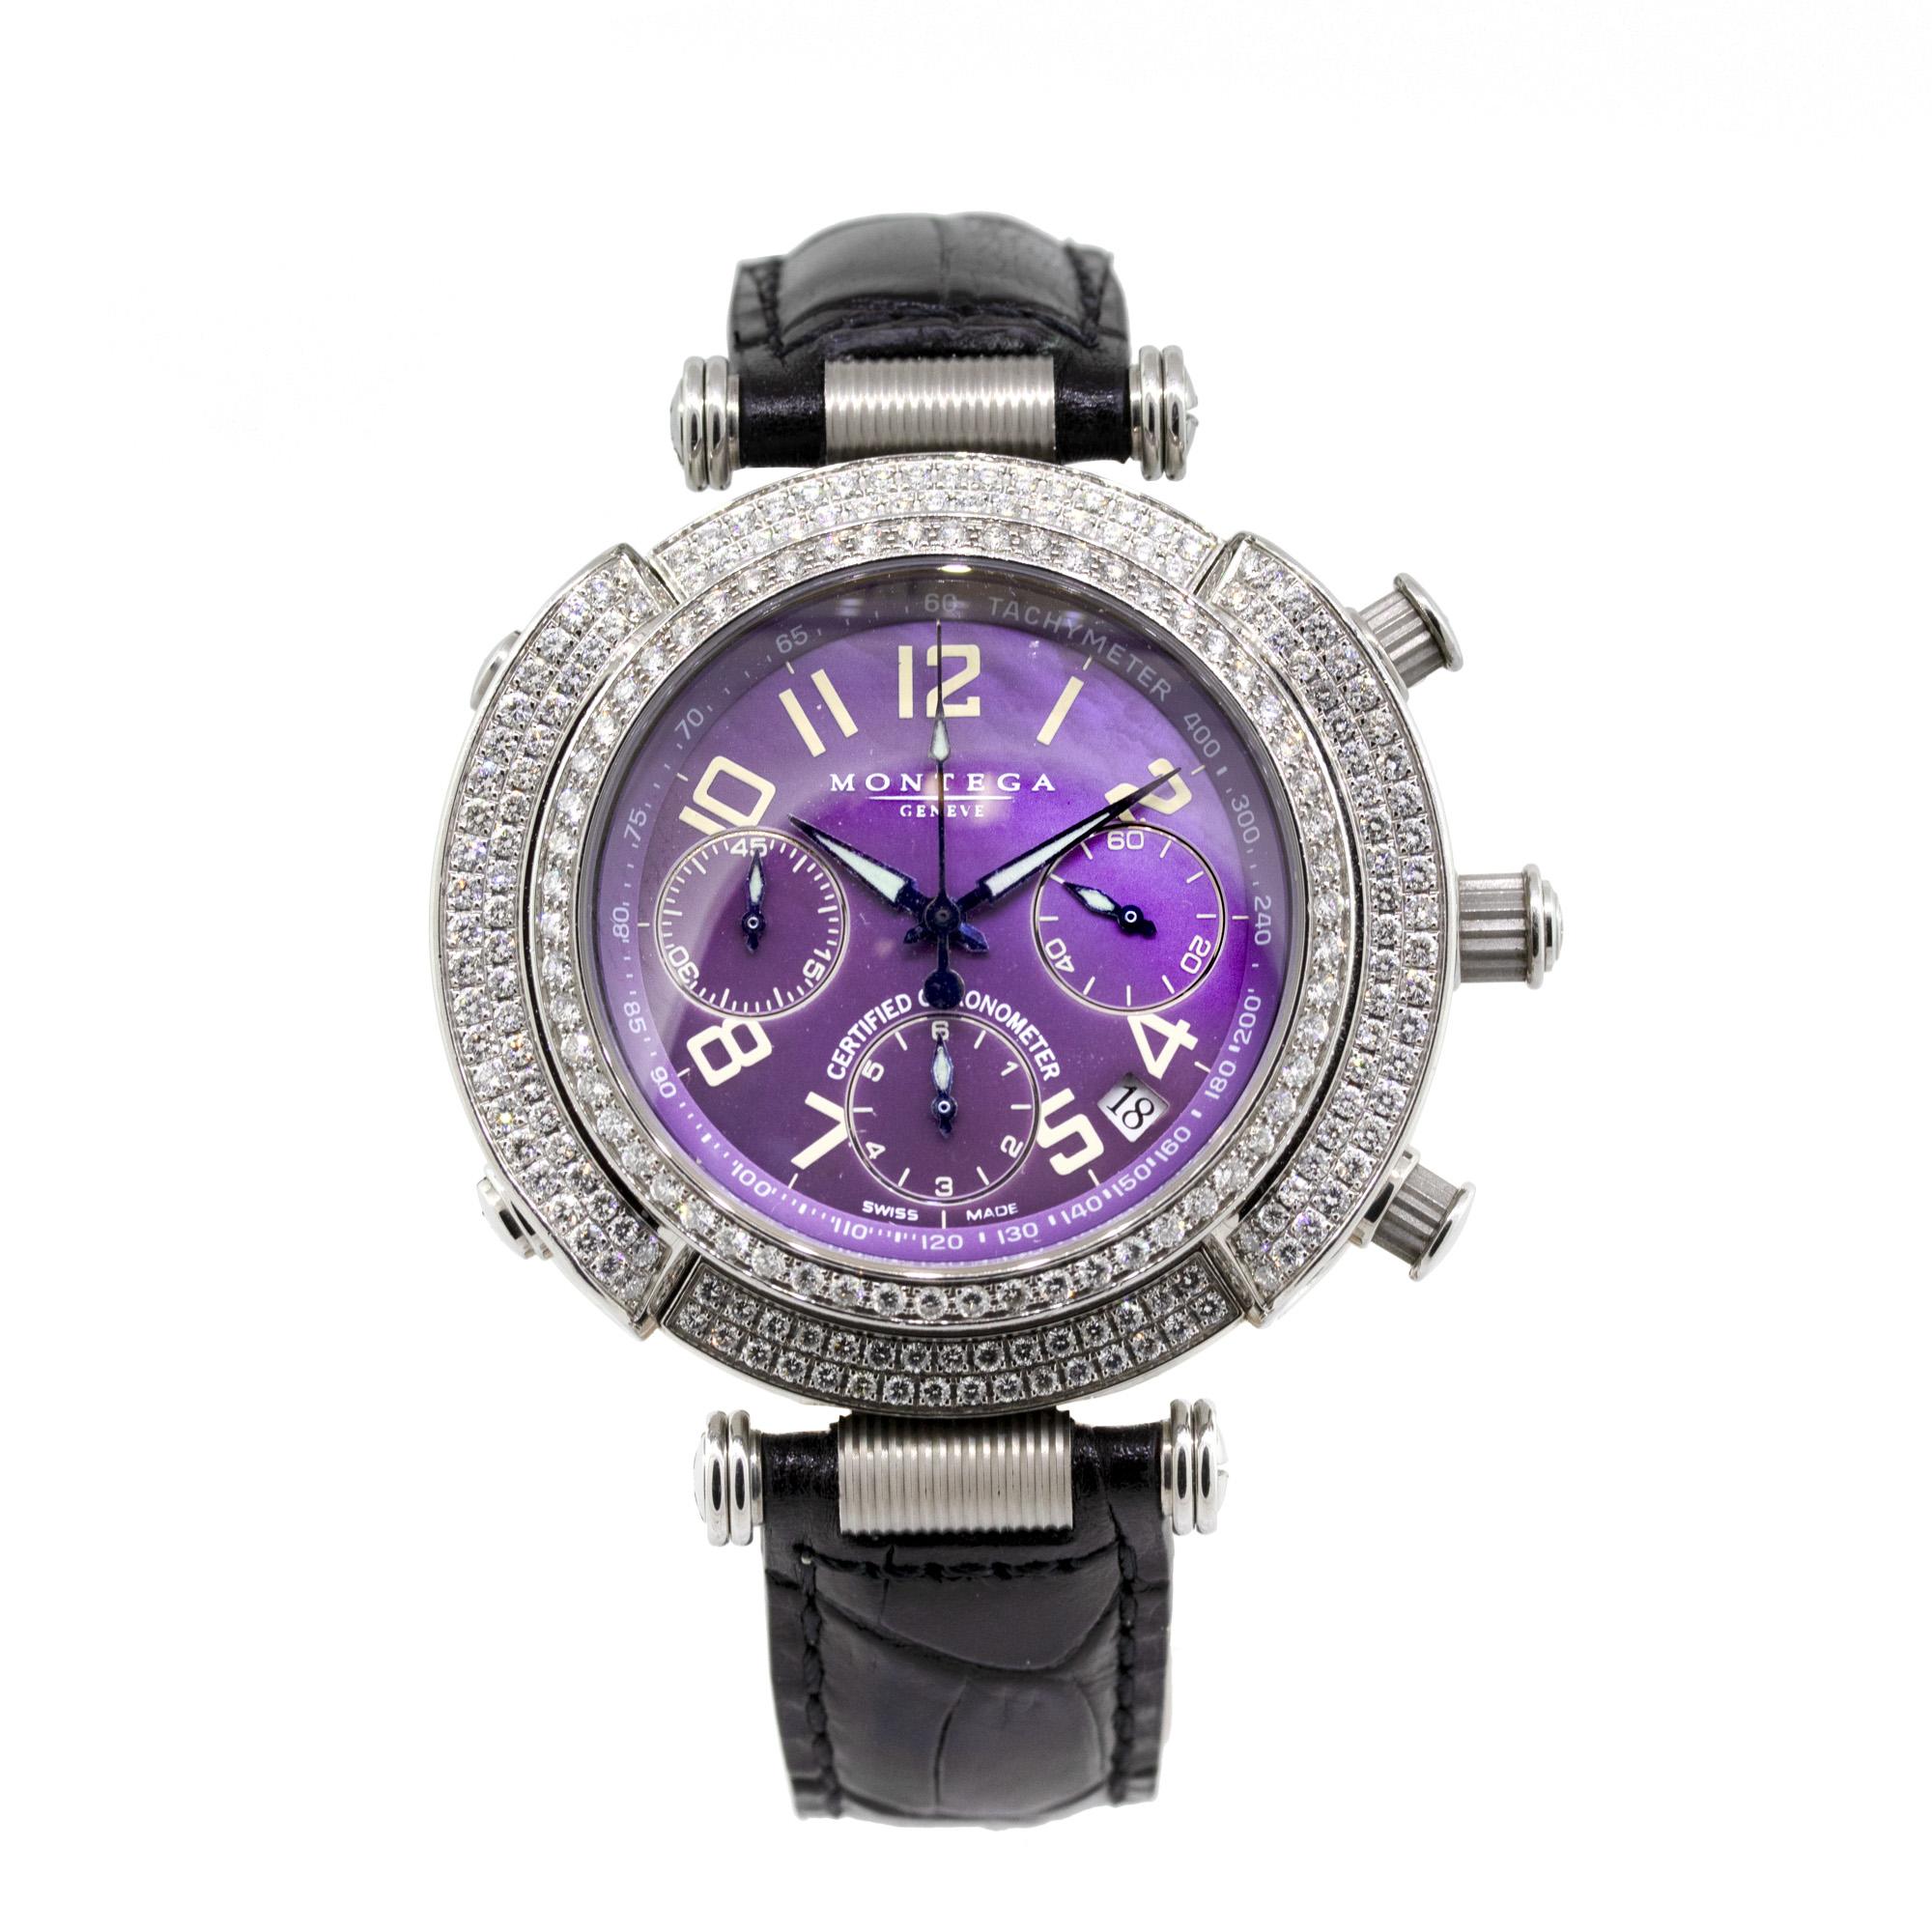 Brand: Montega
Model: Amore
MPN: MC 01
Case Material: Stainless Steel
Case Diameter: 43mm
Crystal: Sapphire crystal
Bezel: Stainless steel with factory Diamonds
Dial: Purple Mother of Pearl Dial with Chronograph and date indicator
Bracelet: Black